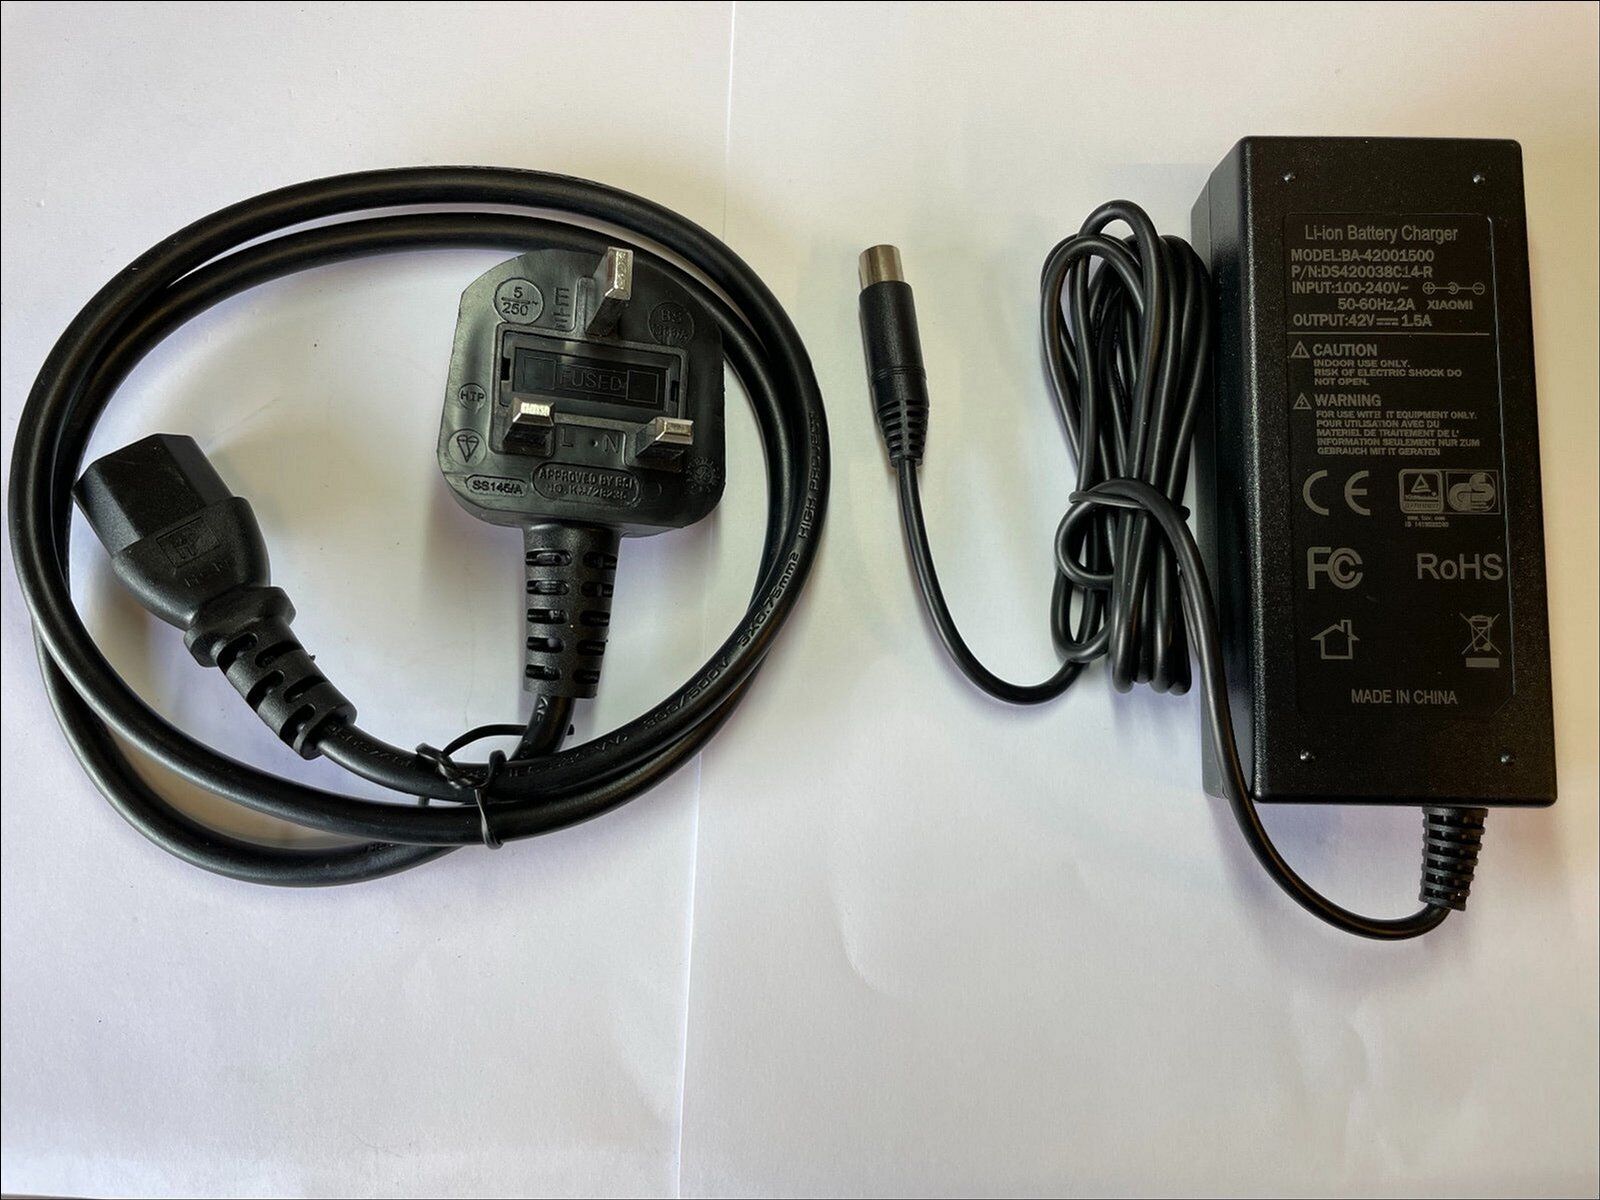 Replacement 42V 1.5A AC-DC Power Adaptor Charger for CityBlitz E-Scooter CB048X MPN BA-4200150 Bundled Items Power Cabl - Click Image to Close